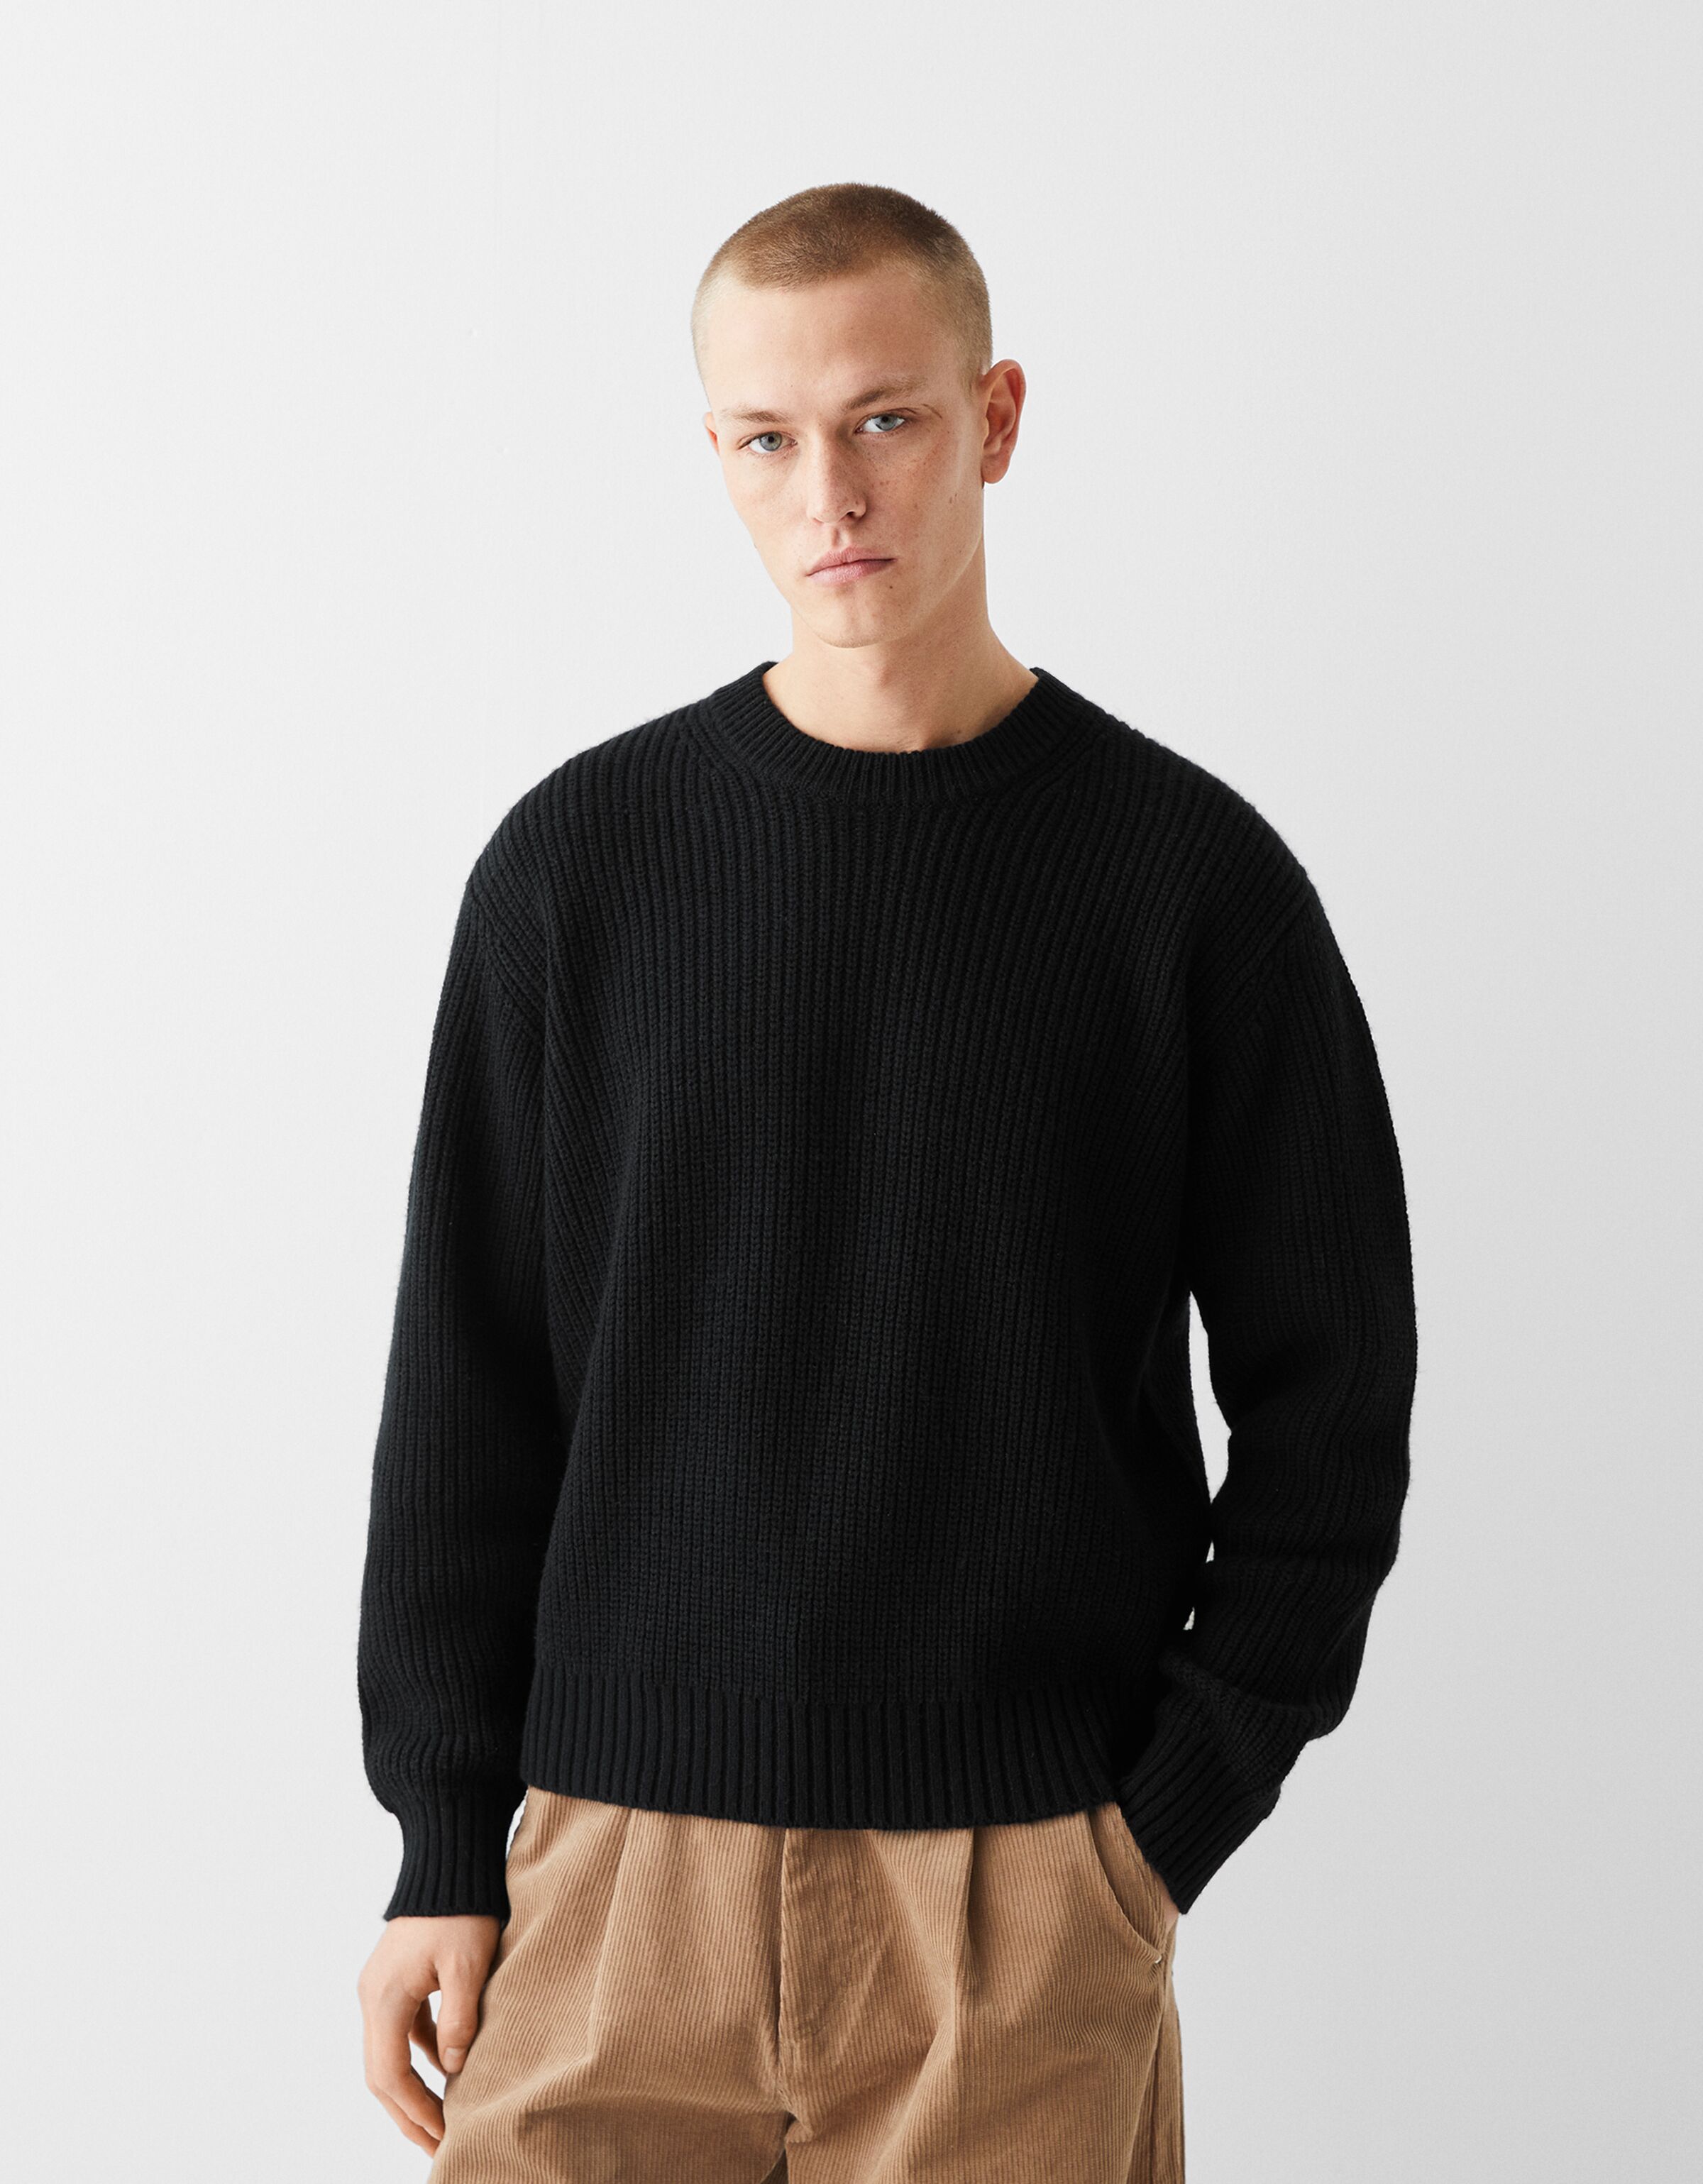 Textured crew neck wool blend sweater - Sweaters and